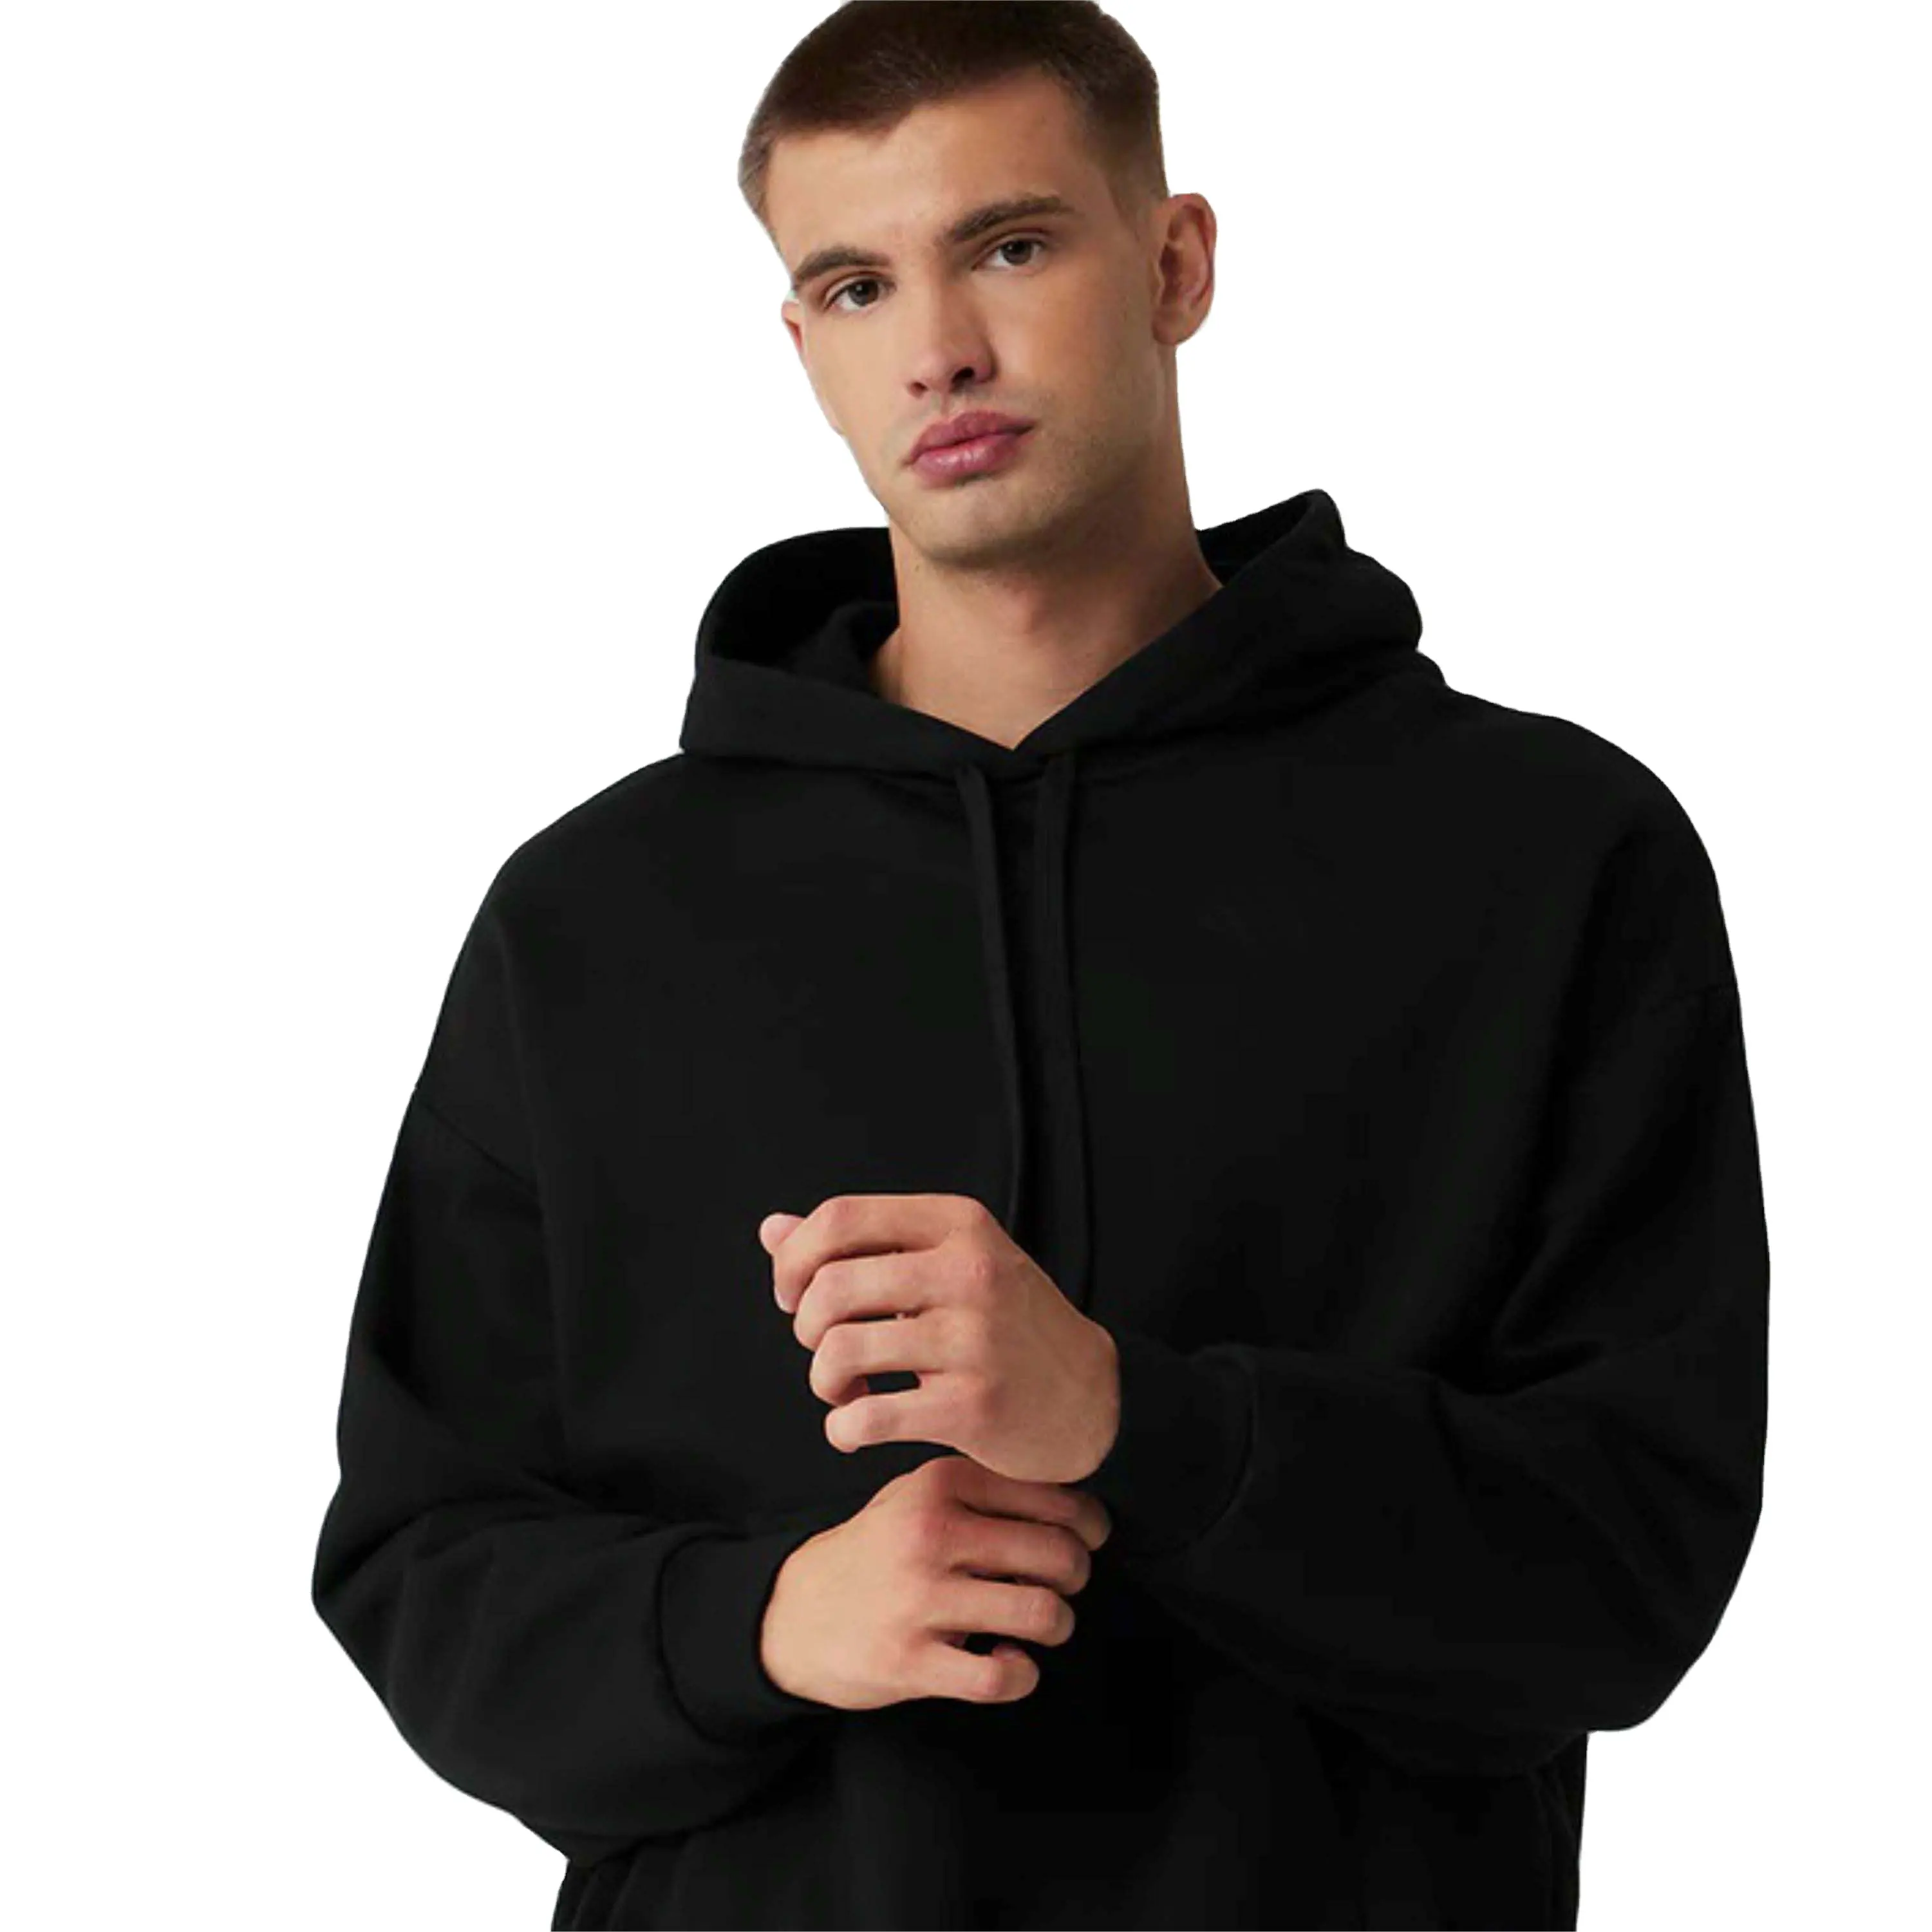 Men's Soft Cotton Fleece Pullover Hoodie - Perfect for Casual Wear with Warm Kangaroo Pocket and Adjustable Drawstrings